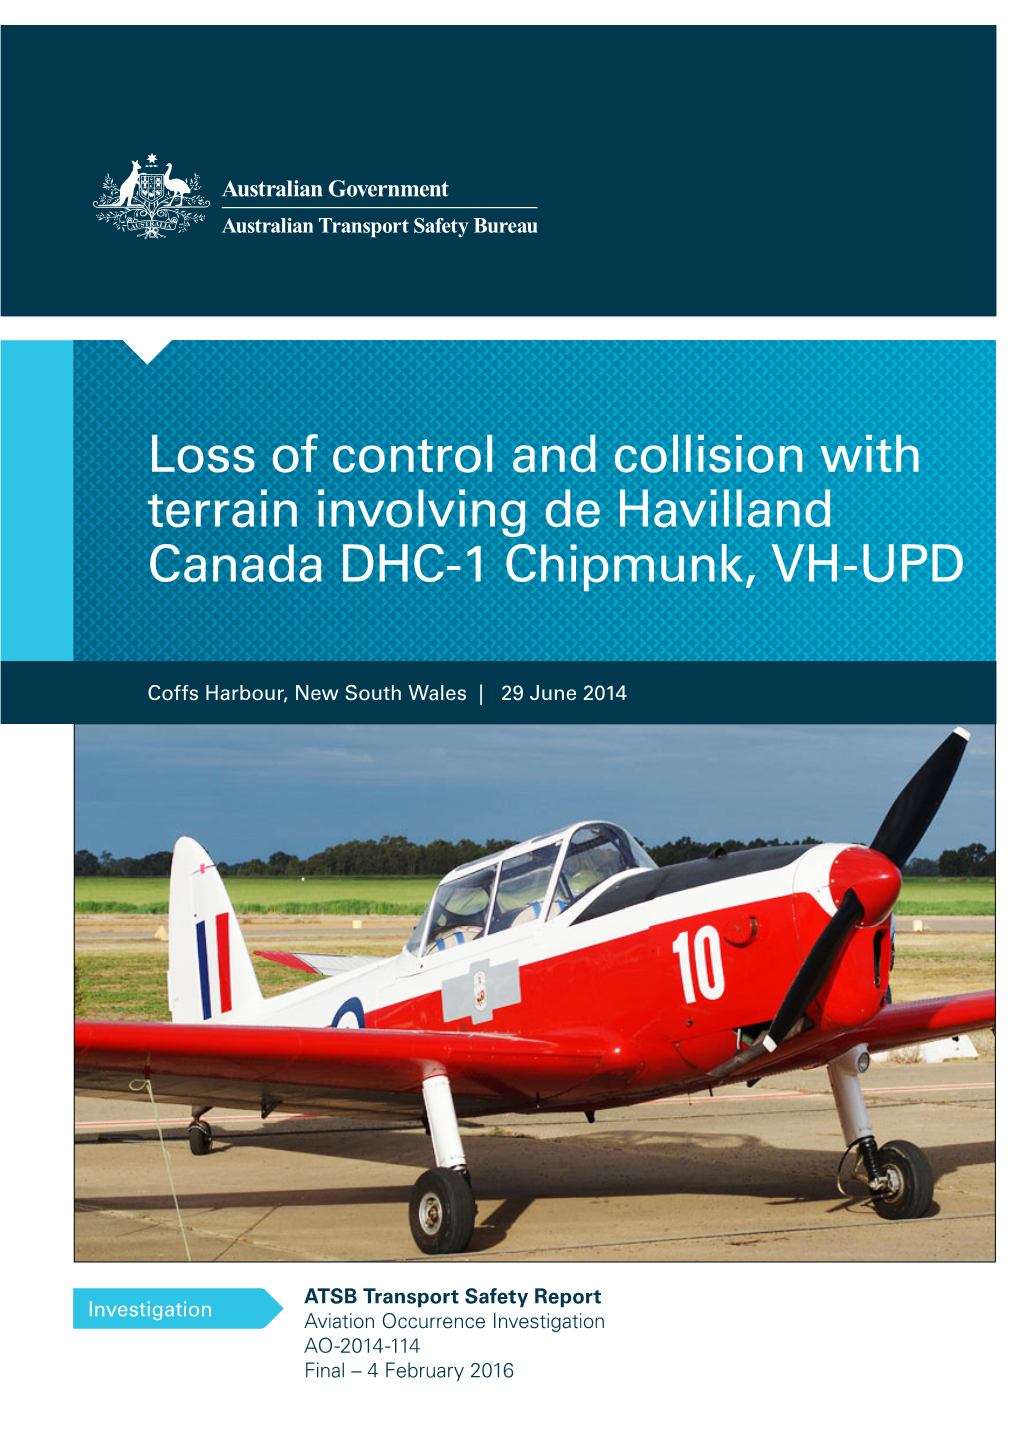 Loss of Control and Collision with Terrain Involving De Havilland Canada DHC-1 Chipmunk, VH-UPD, Coffs Harbour, New South Wales 29 June 2014